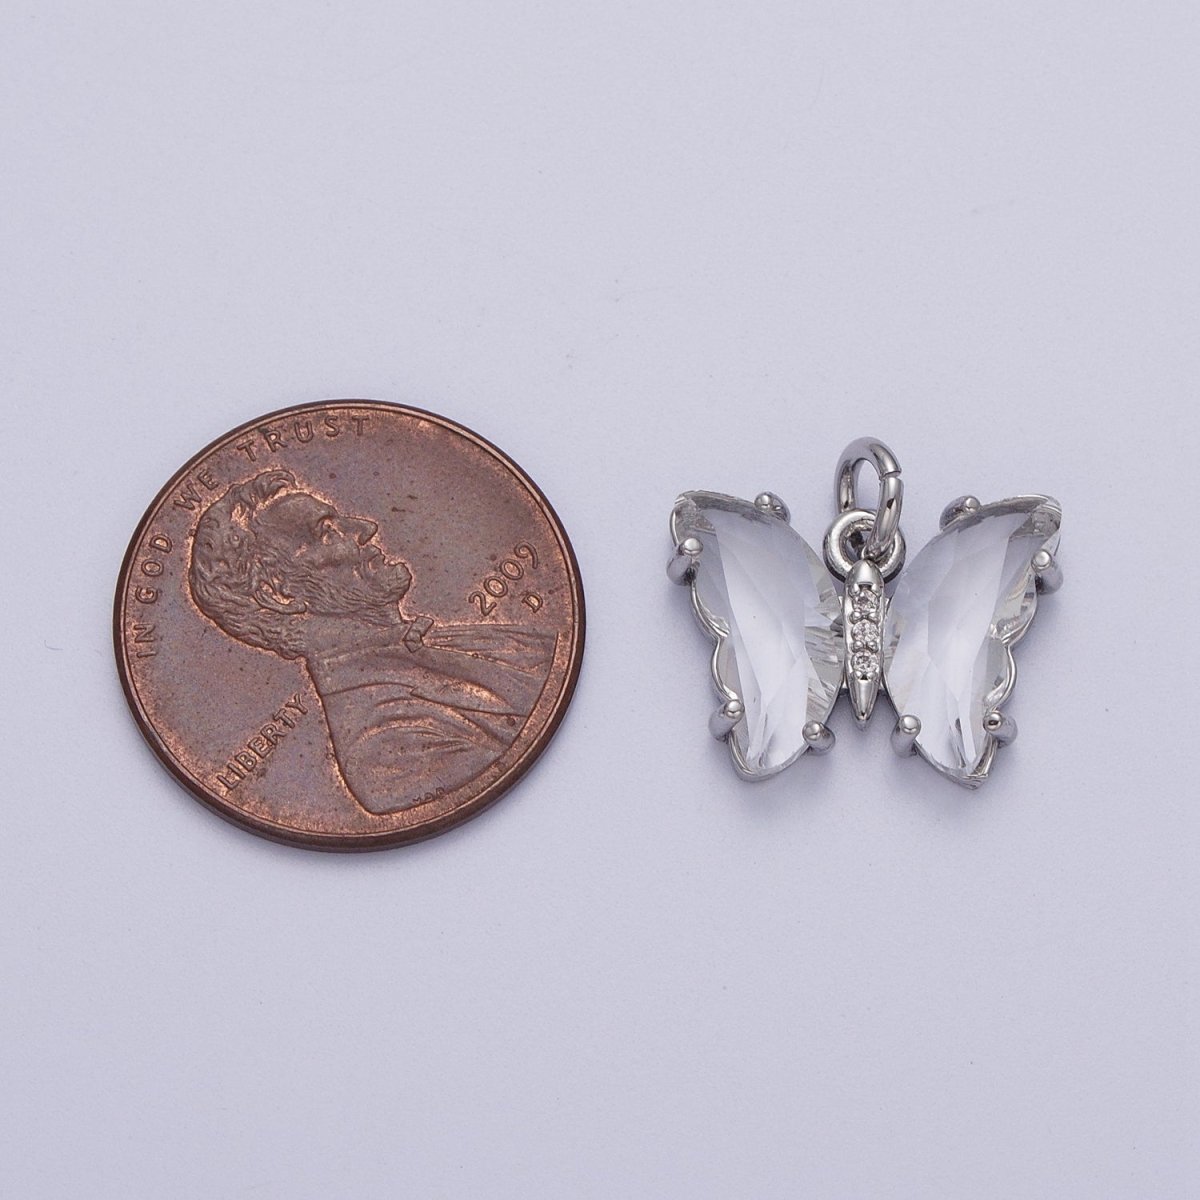 White Gold Filled Butterfly Mariposa Labradorite, Clear Acrylic Wings Silver Charm | C-644 C-687 - DLUXCA